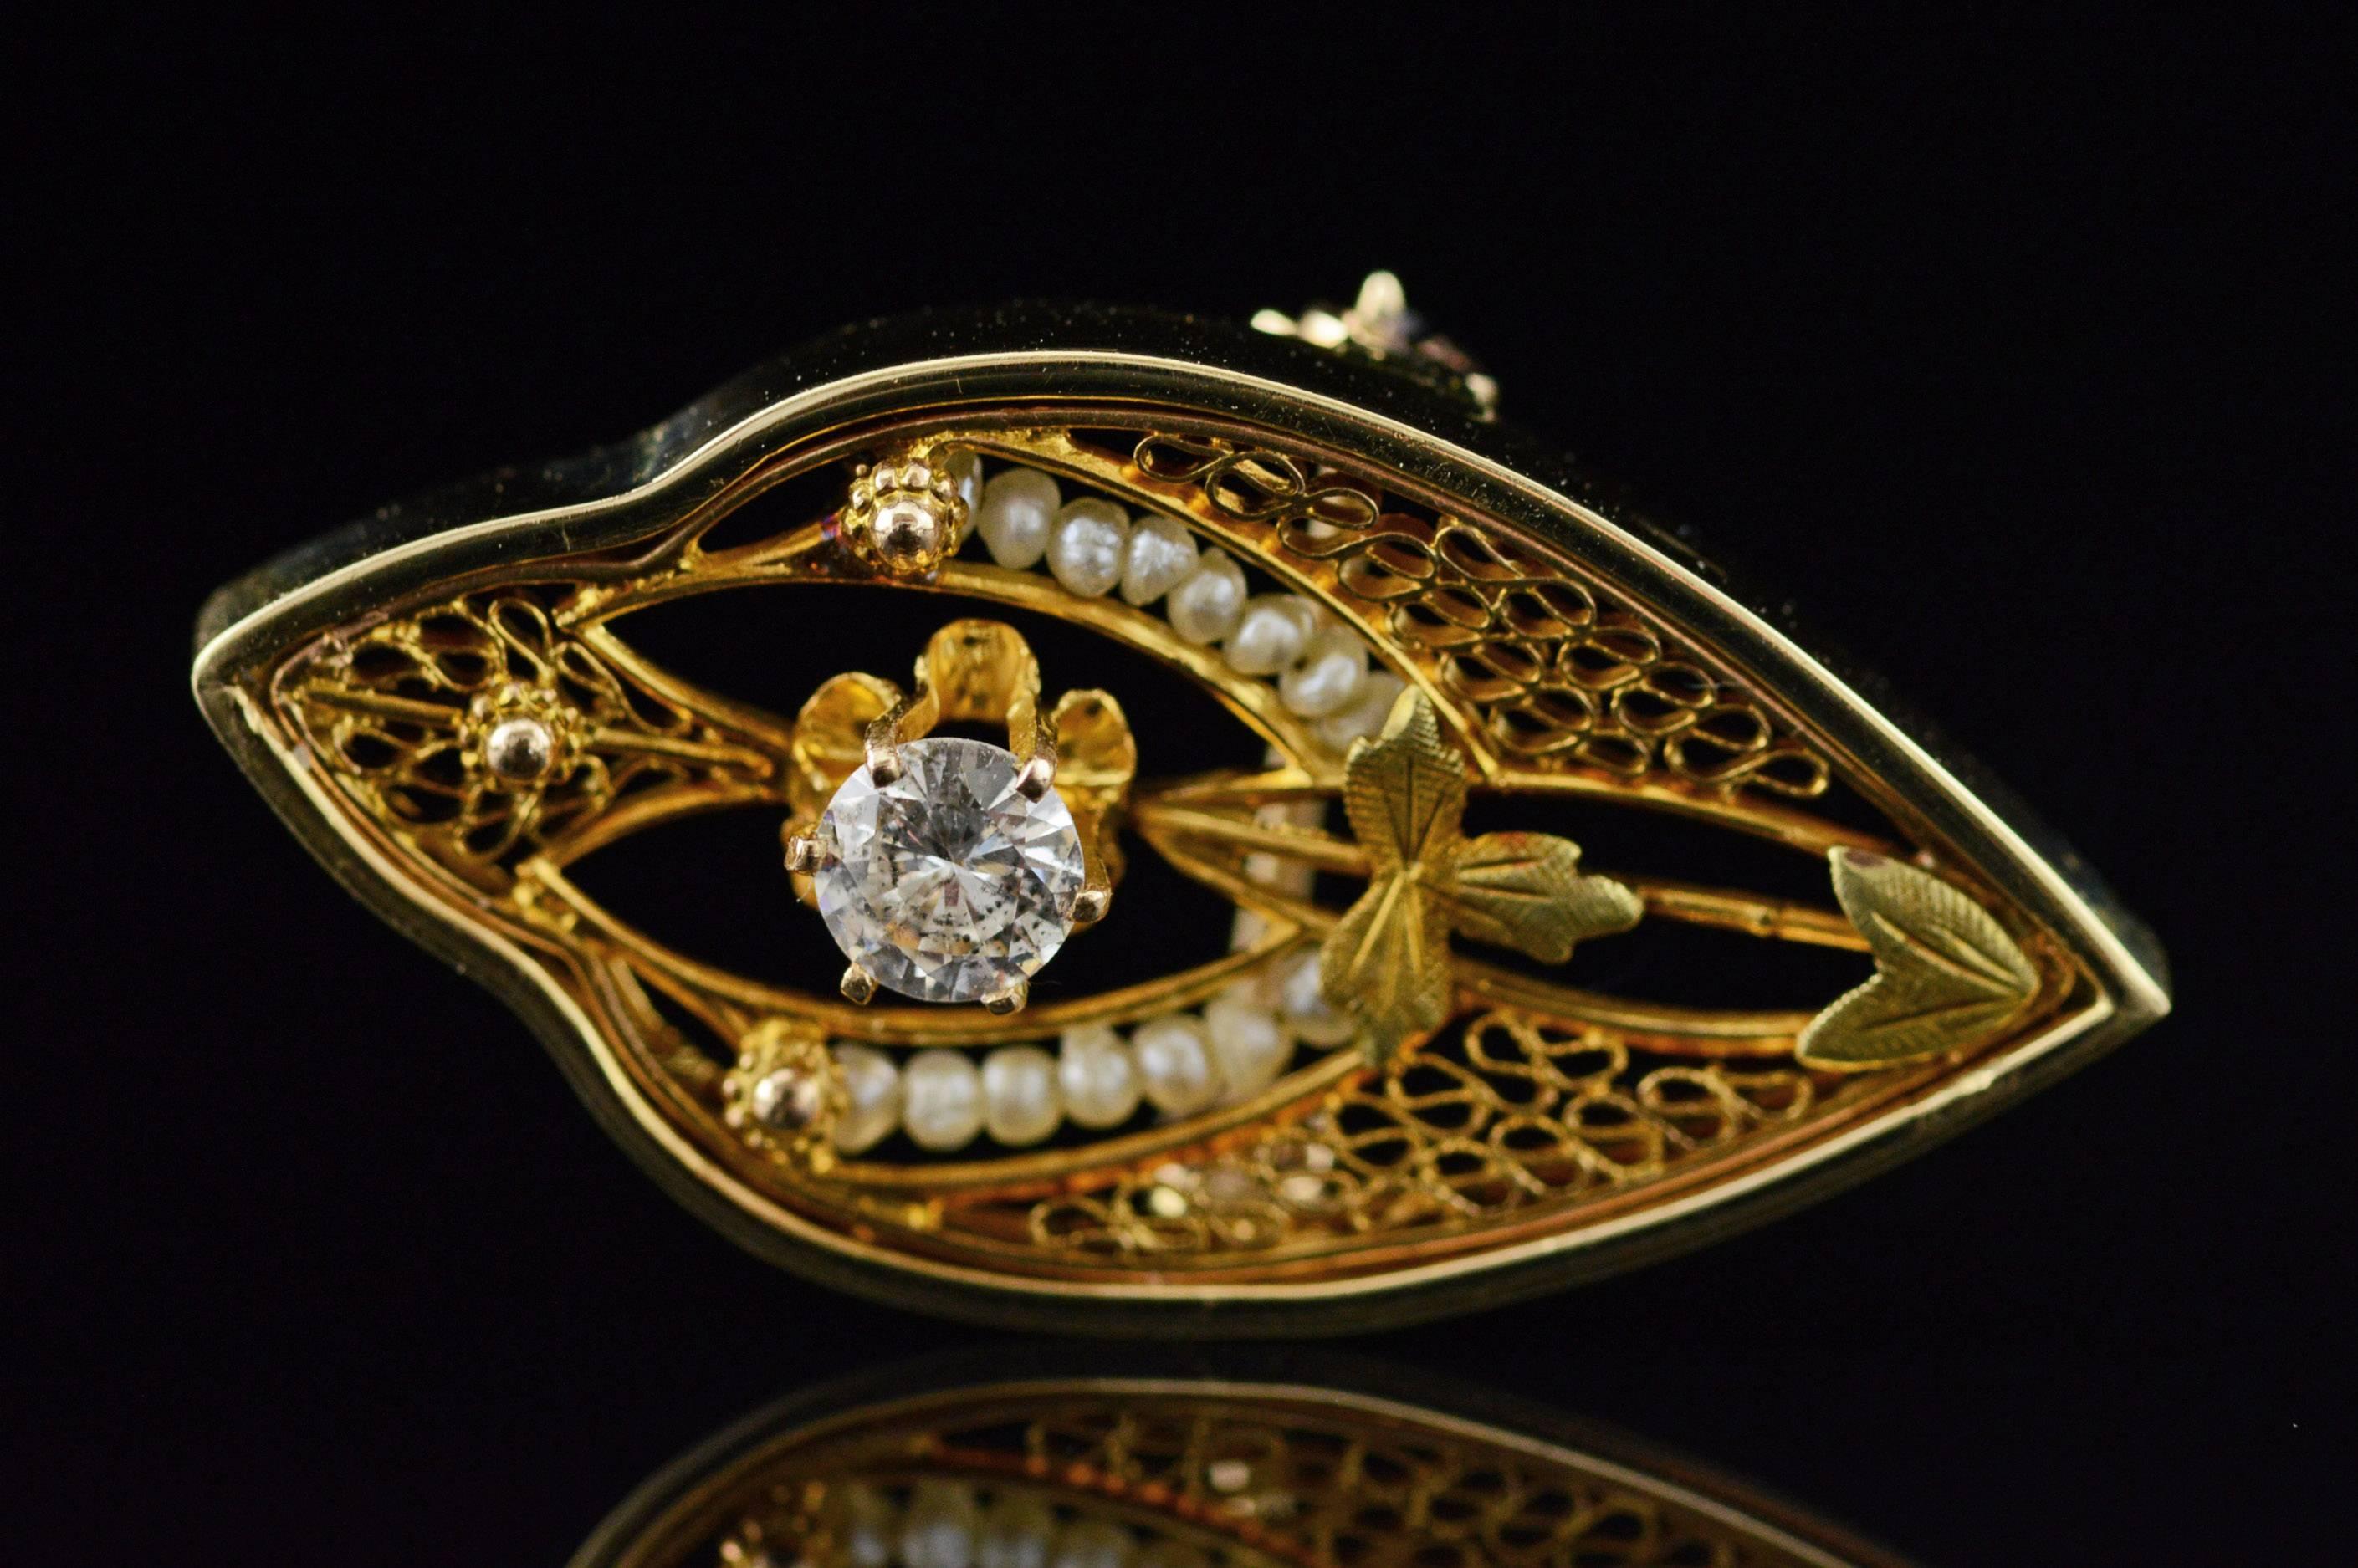 All diamonds are graded according to GIA grading standards. (When applicable)

·Item: 14K Victorian 0.23 CT Diamond Seed Pearl Filigree Pin/Brooch Yellow Gold

·Era: Victorian / 1890s

·Composition: 14k Gold Acid Tested

·Weight: 3.6g